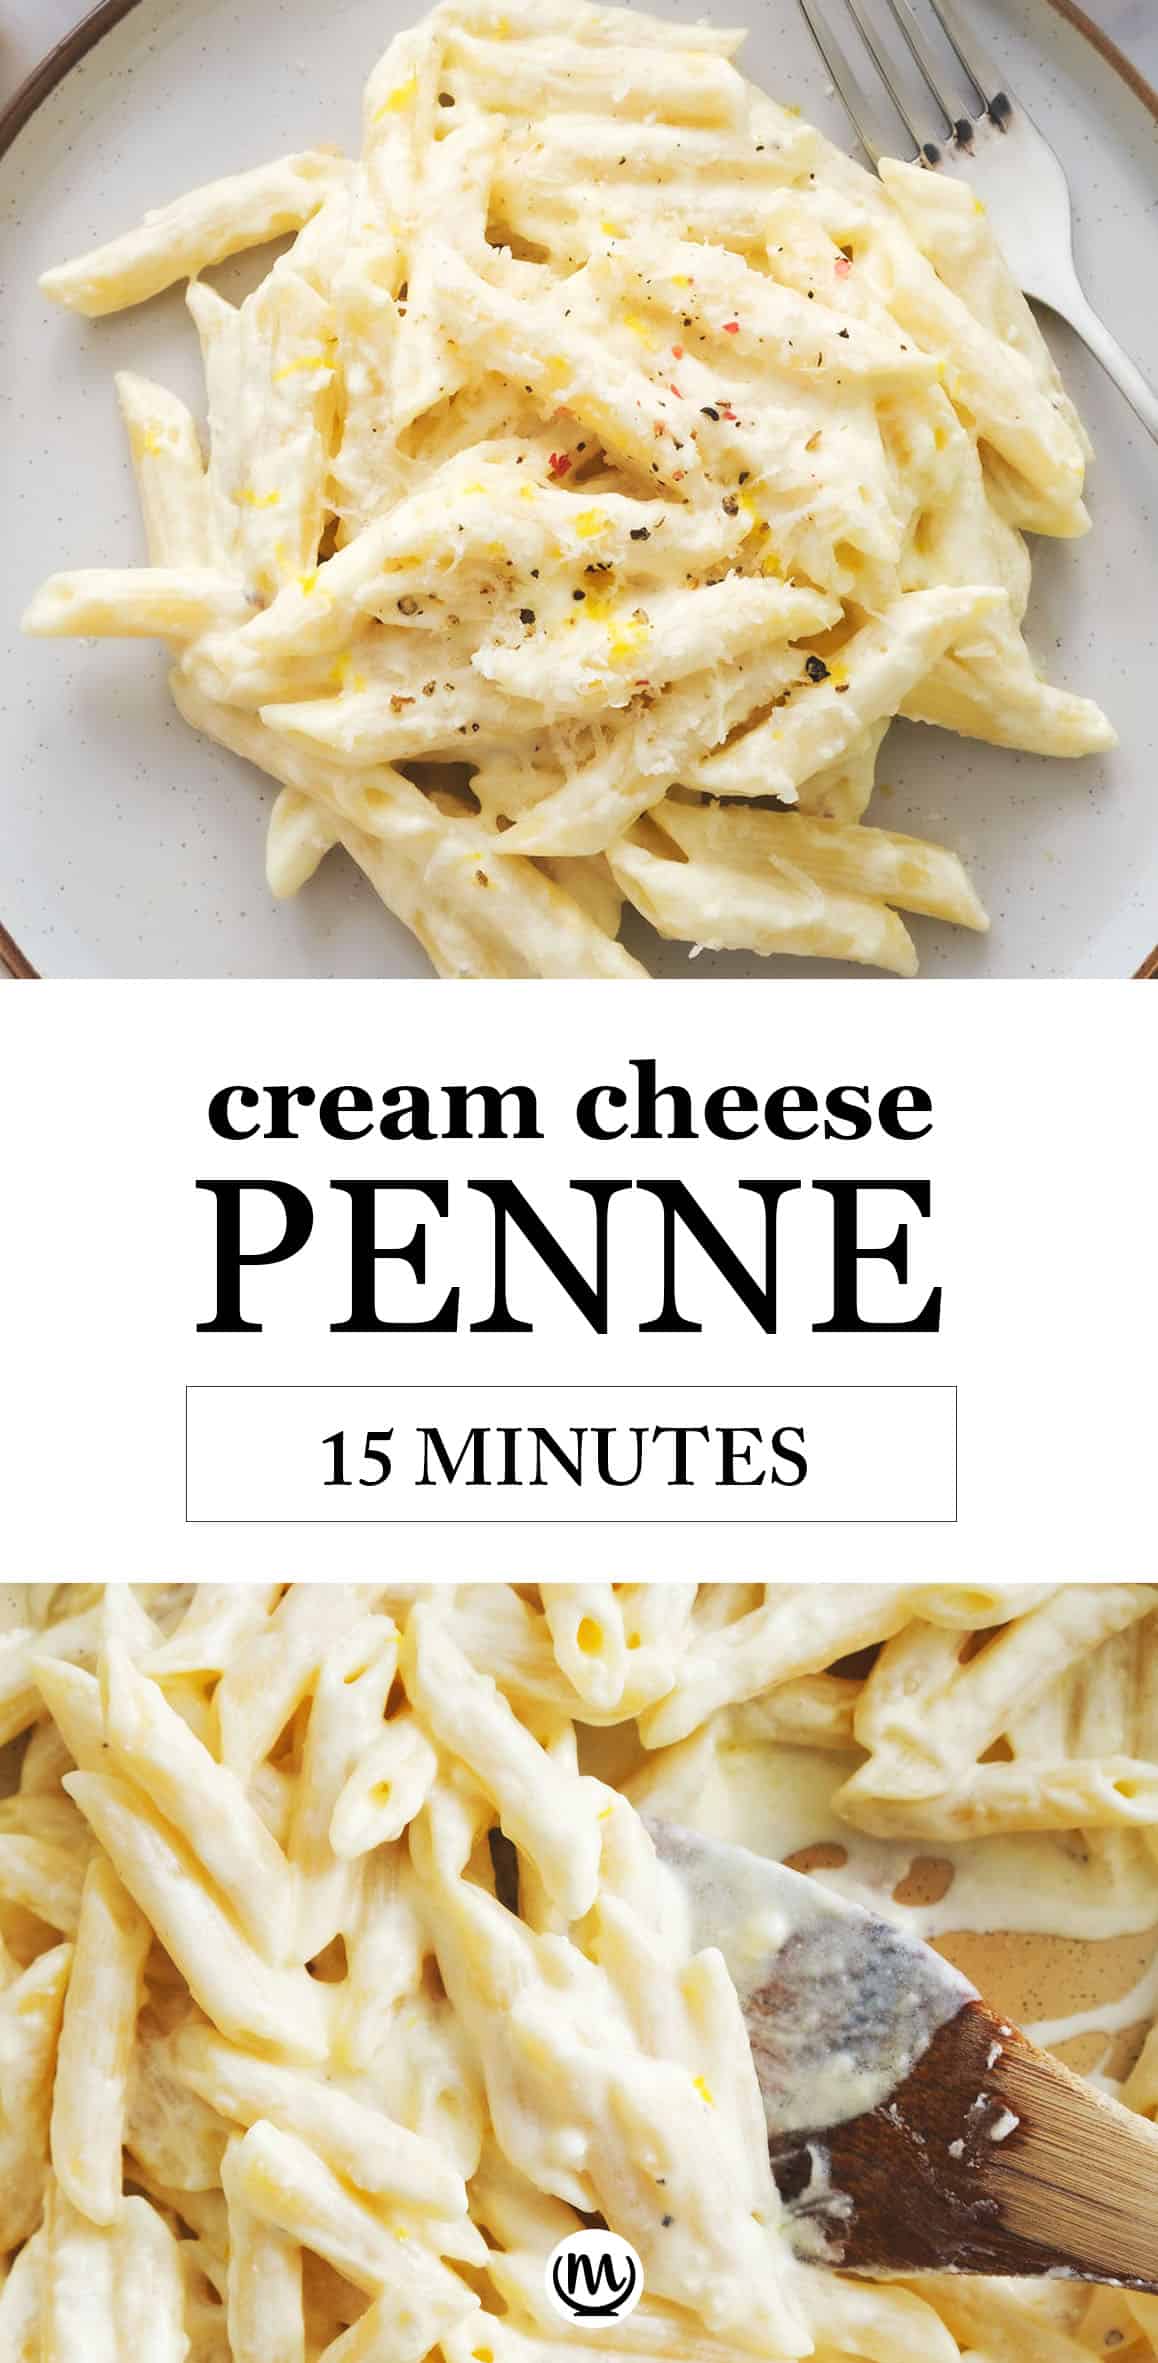 Creamy Penne Pasta Recipe The Clever Meal 6553